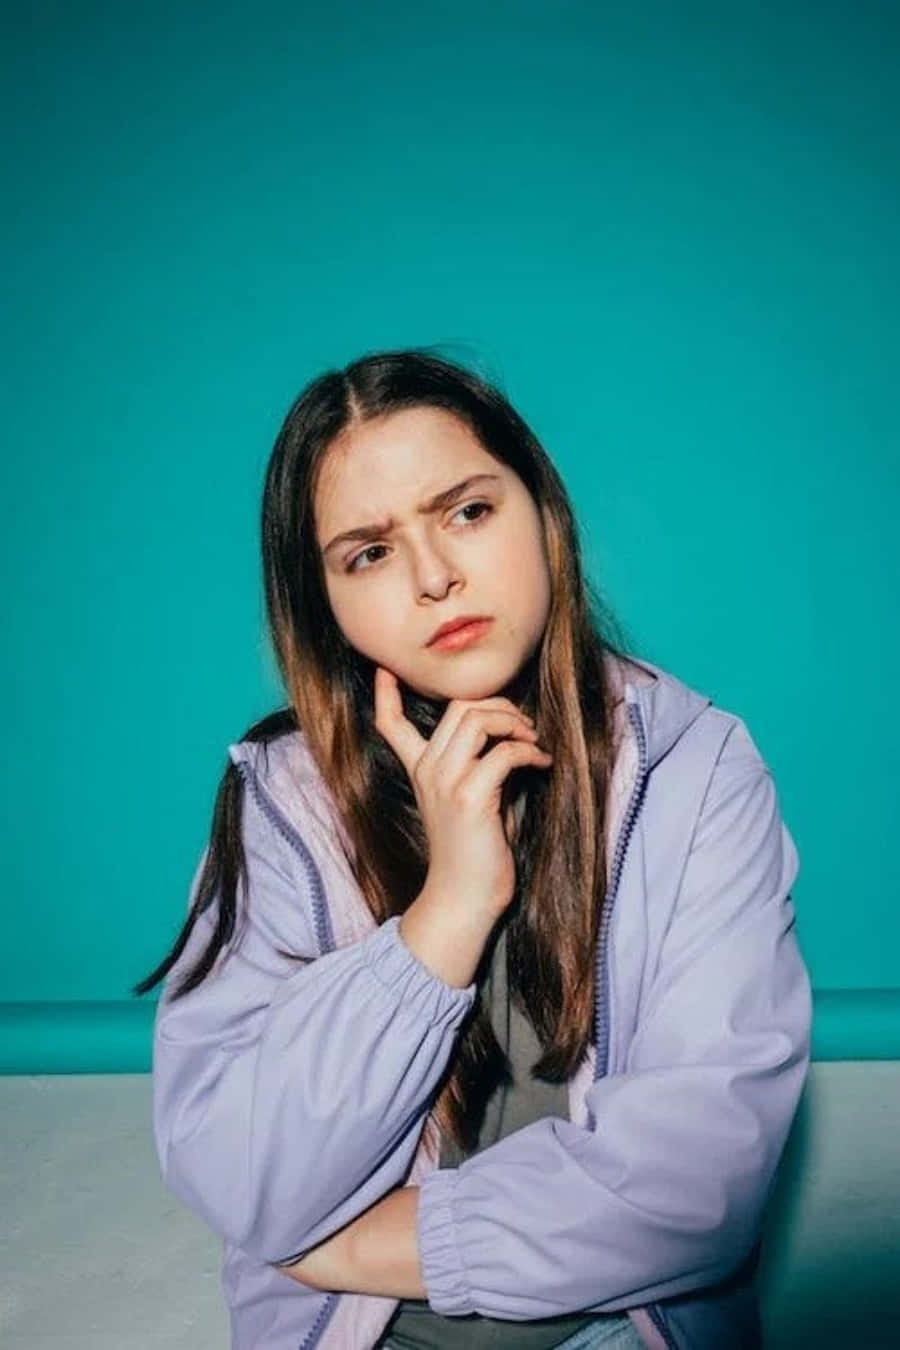 A Young Woman With Long Hair And Blue Jacket Sitting On A Blue Background